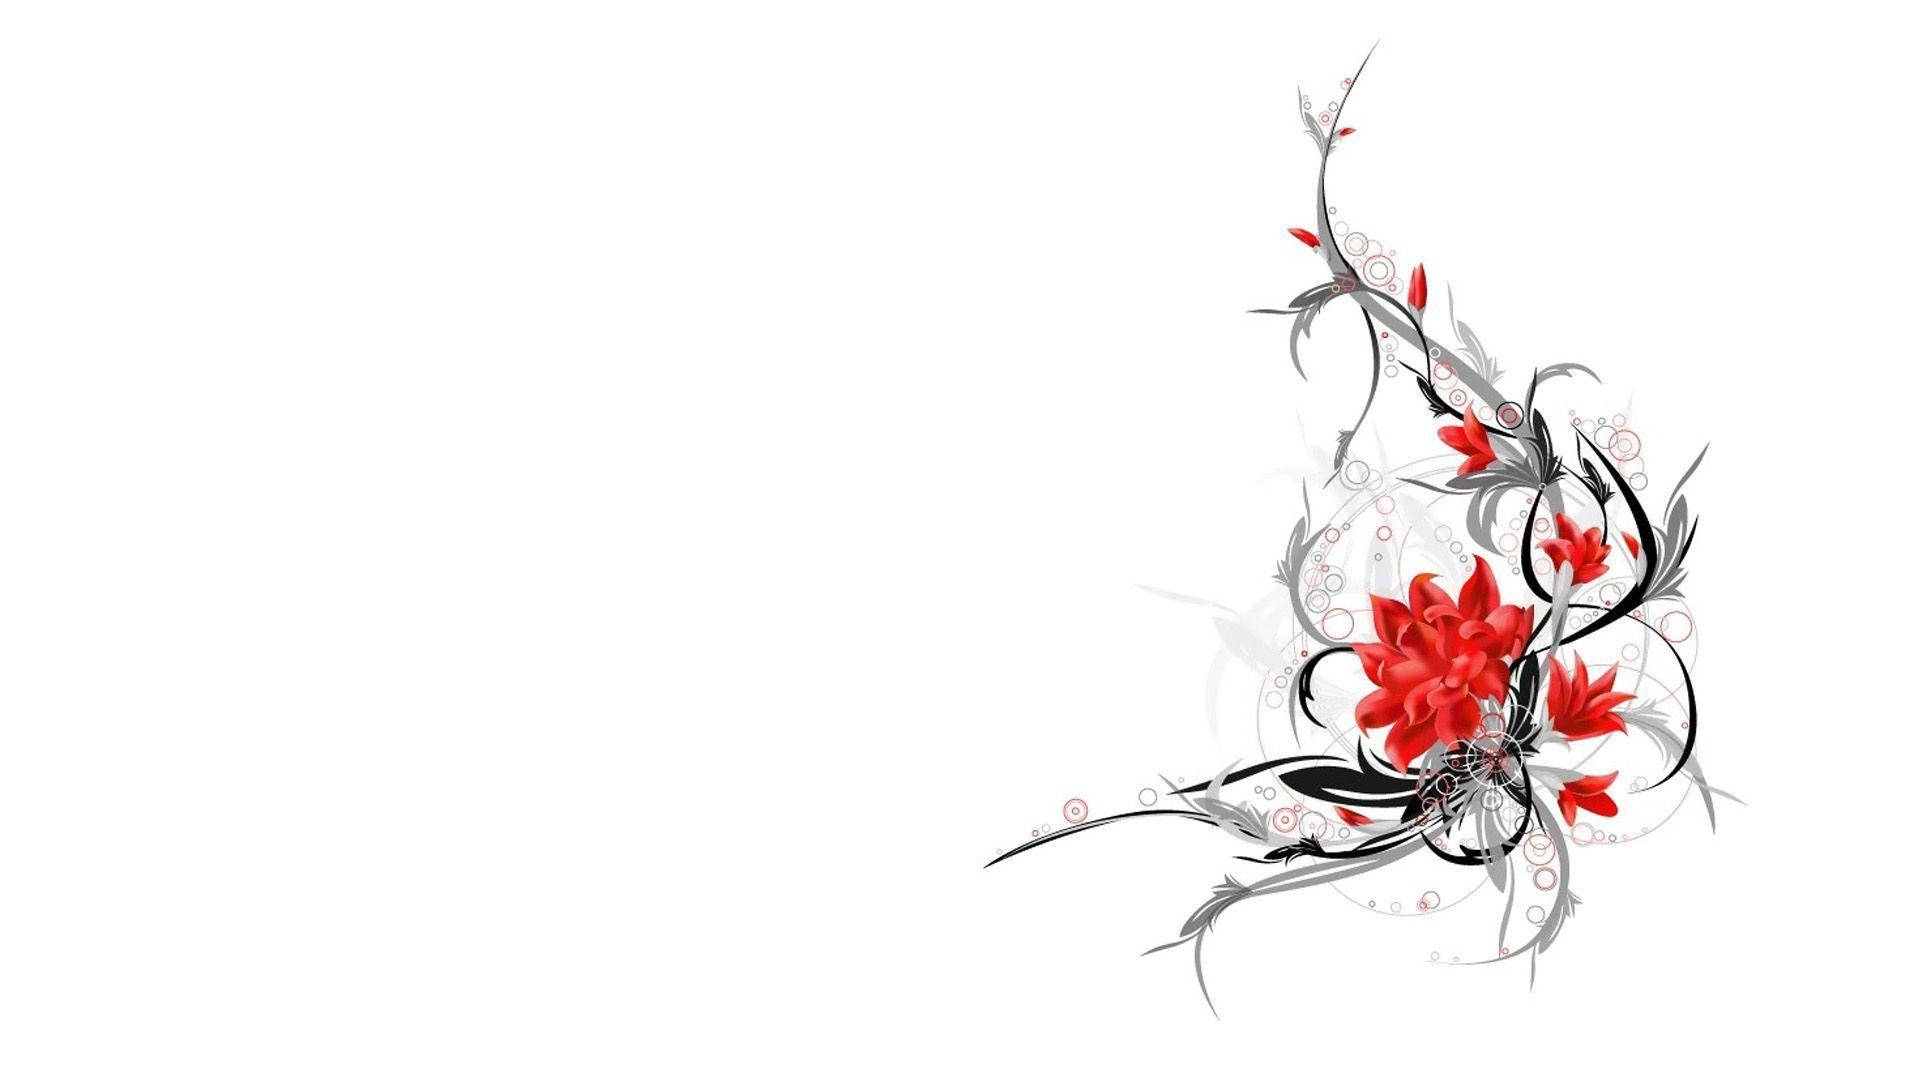 Flower Graphic On White Screen Background